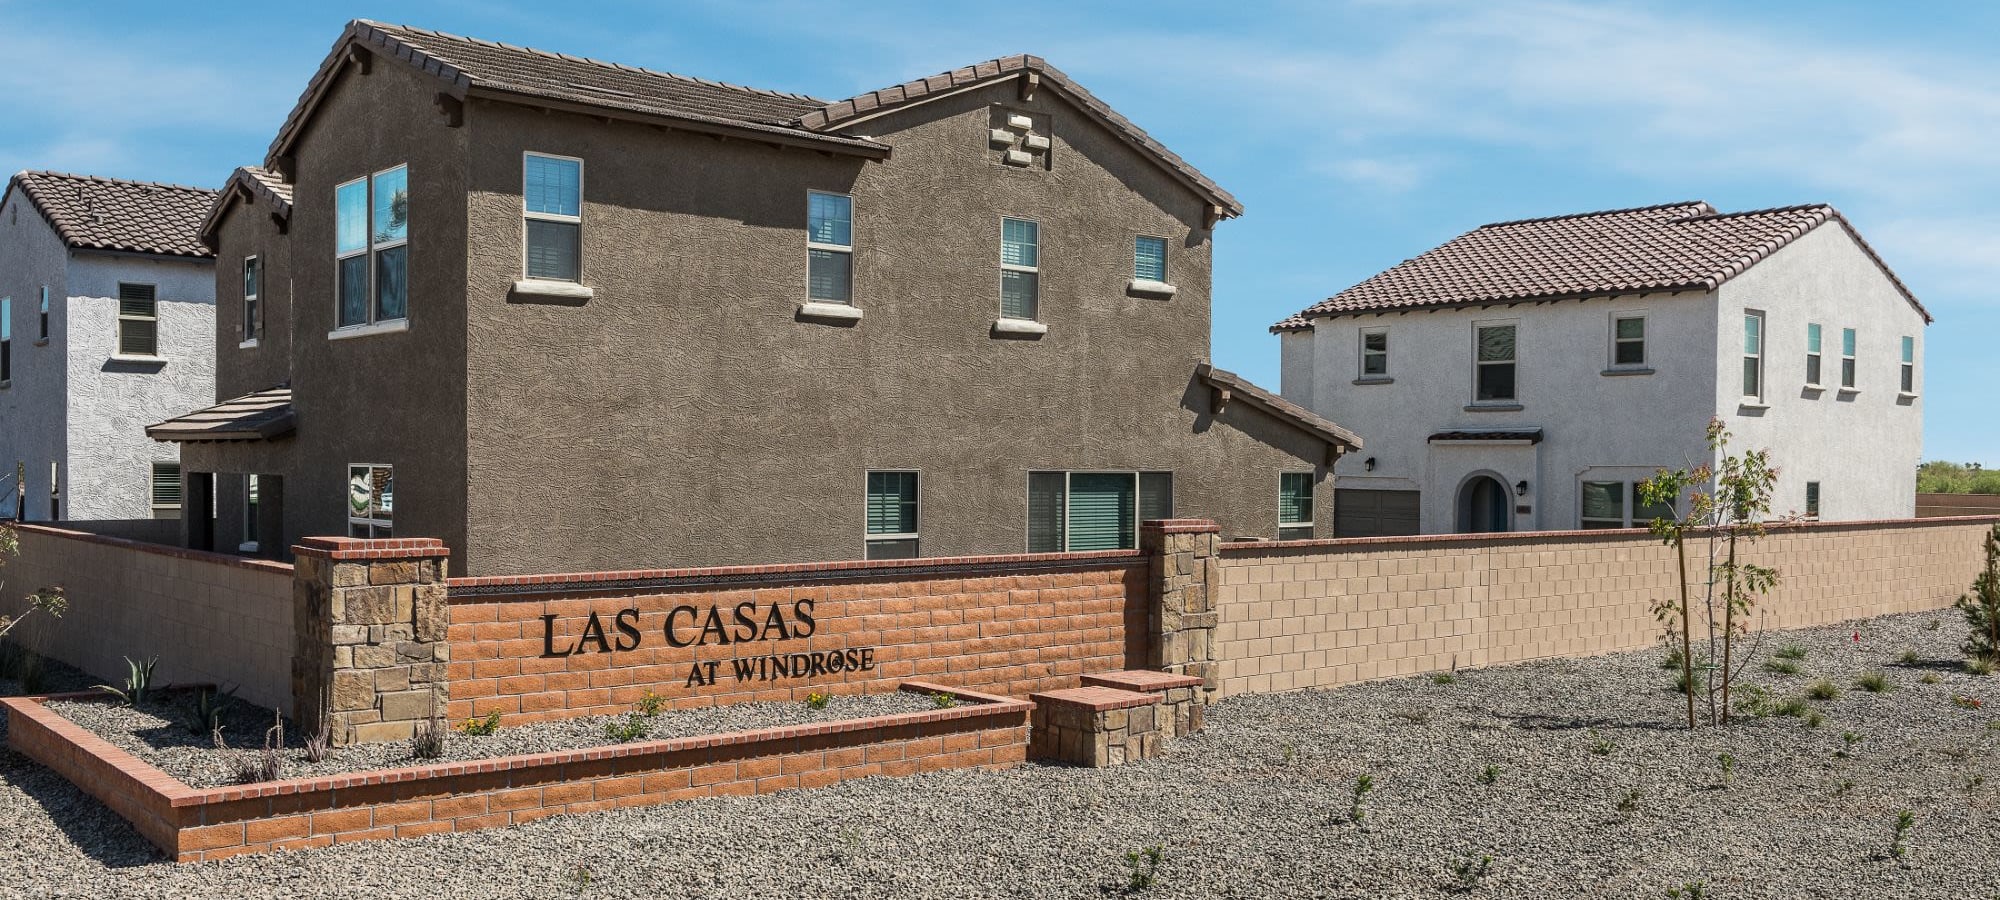 Privacy policy at Las Casas at Windrose in Litchfield Park, Arizona